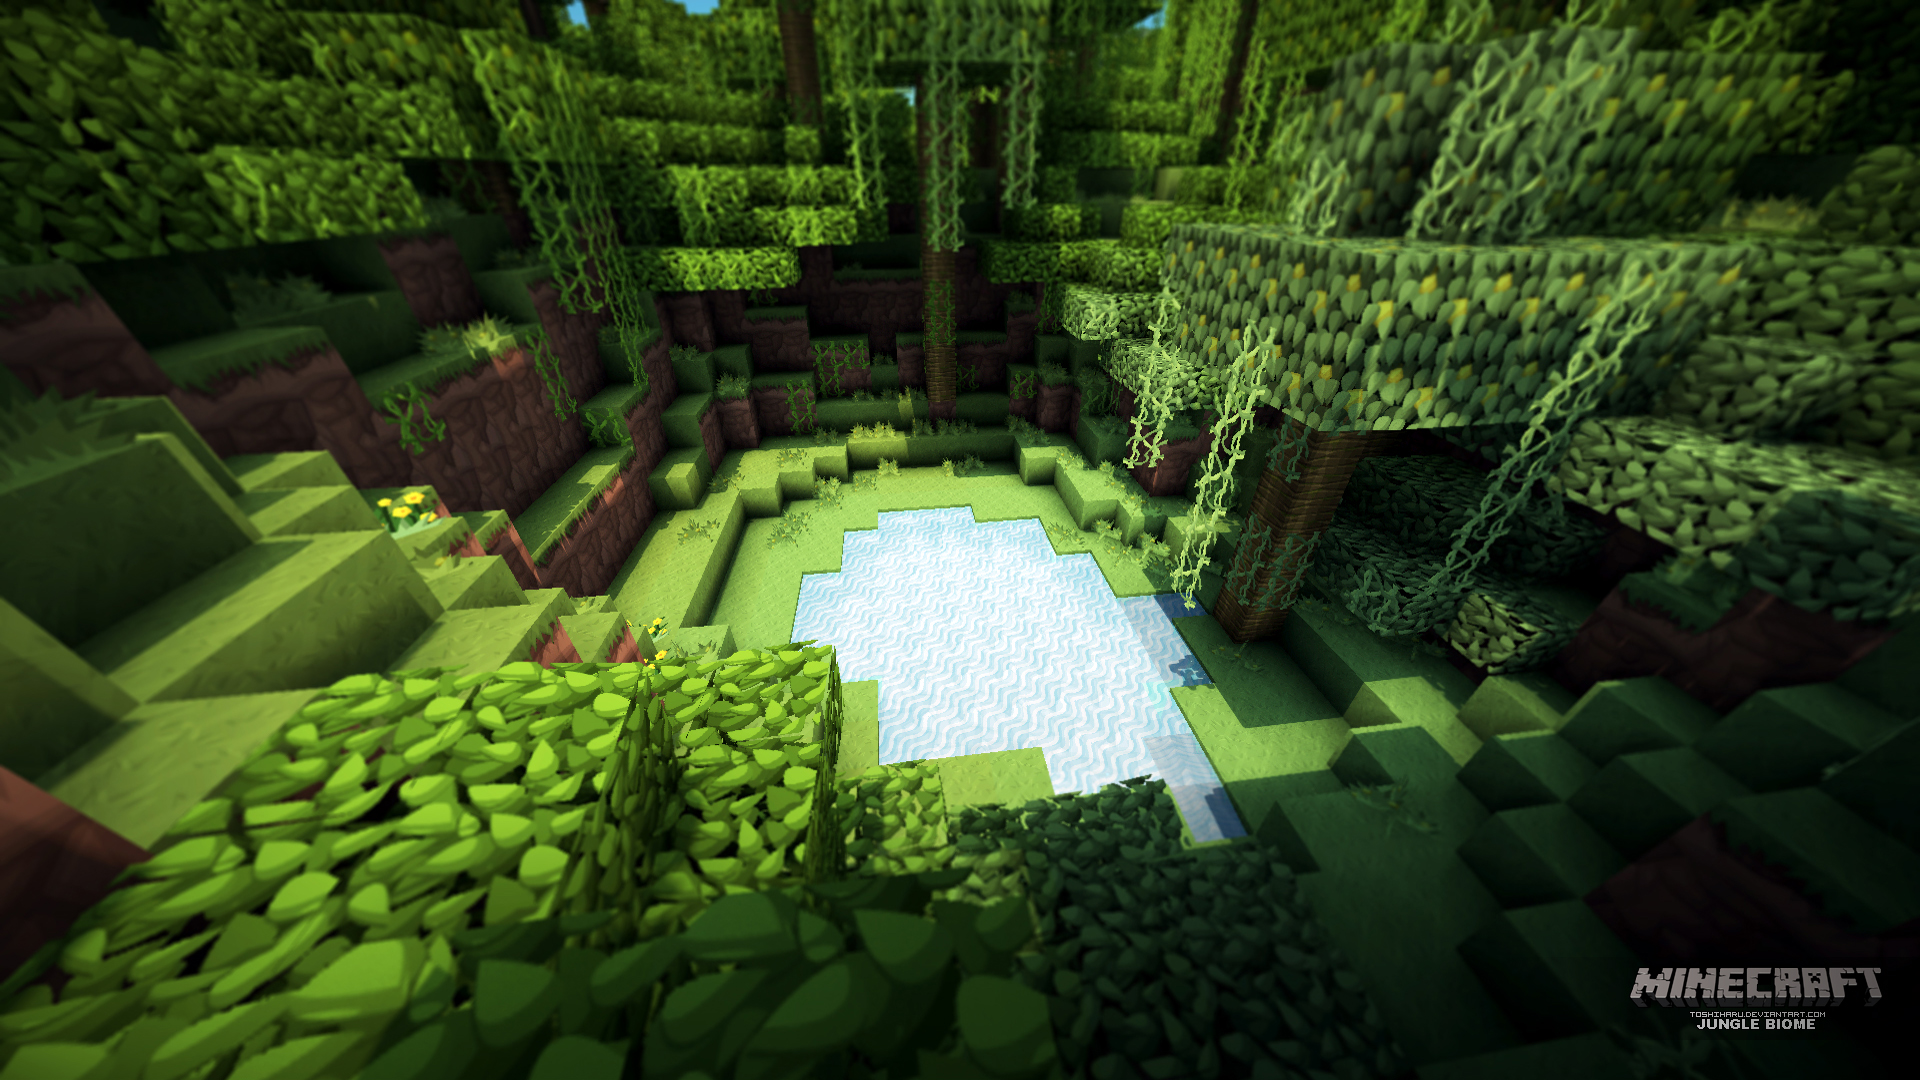 Free download Minecraft Jungle Biome Wallpaper Minecraft Forum [1920x1080] for your Desktop, Mobile & Tablet. Explore How Do I Find Wallpaper. How Do I Get Wallpaper, How Much Wallpaper